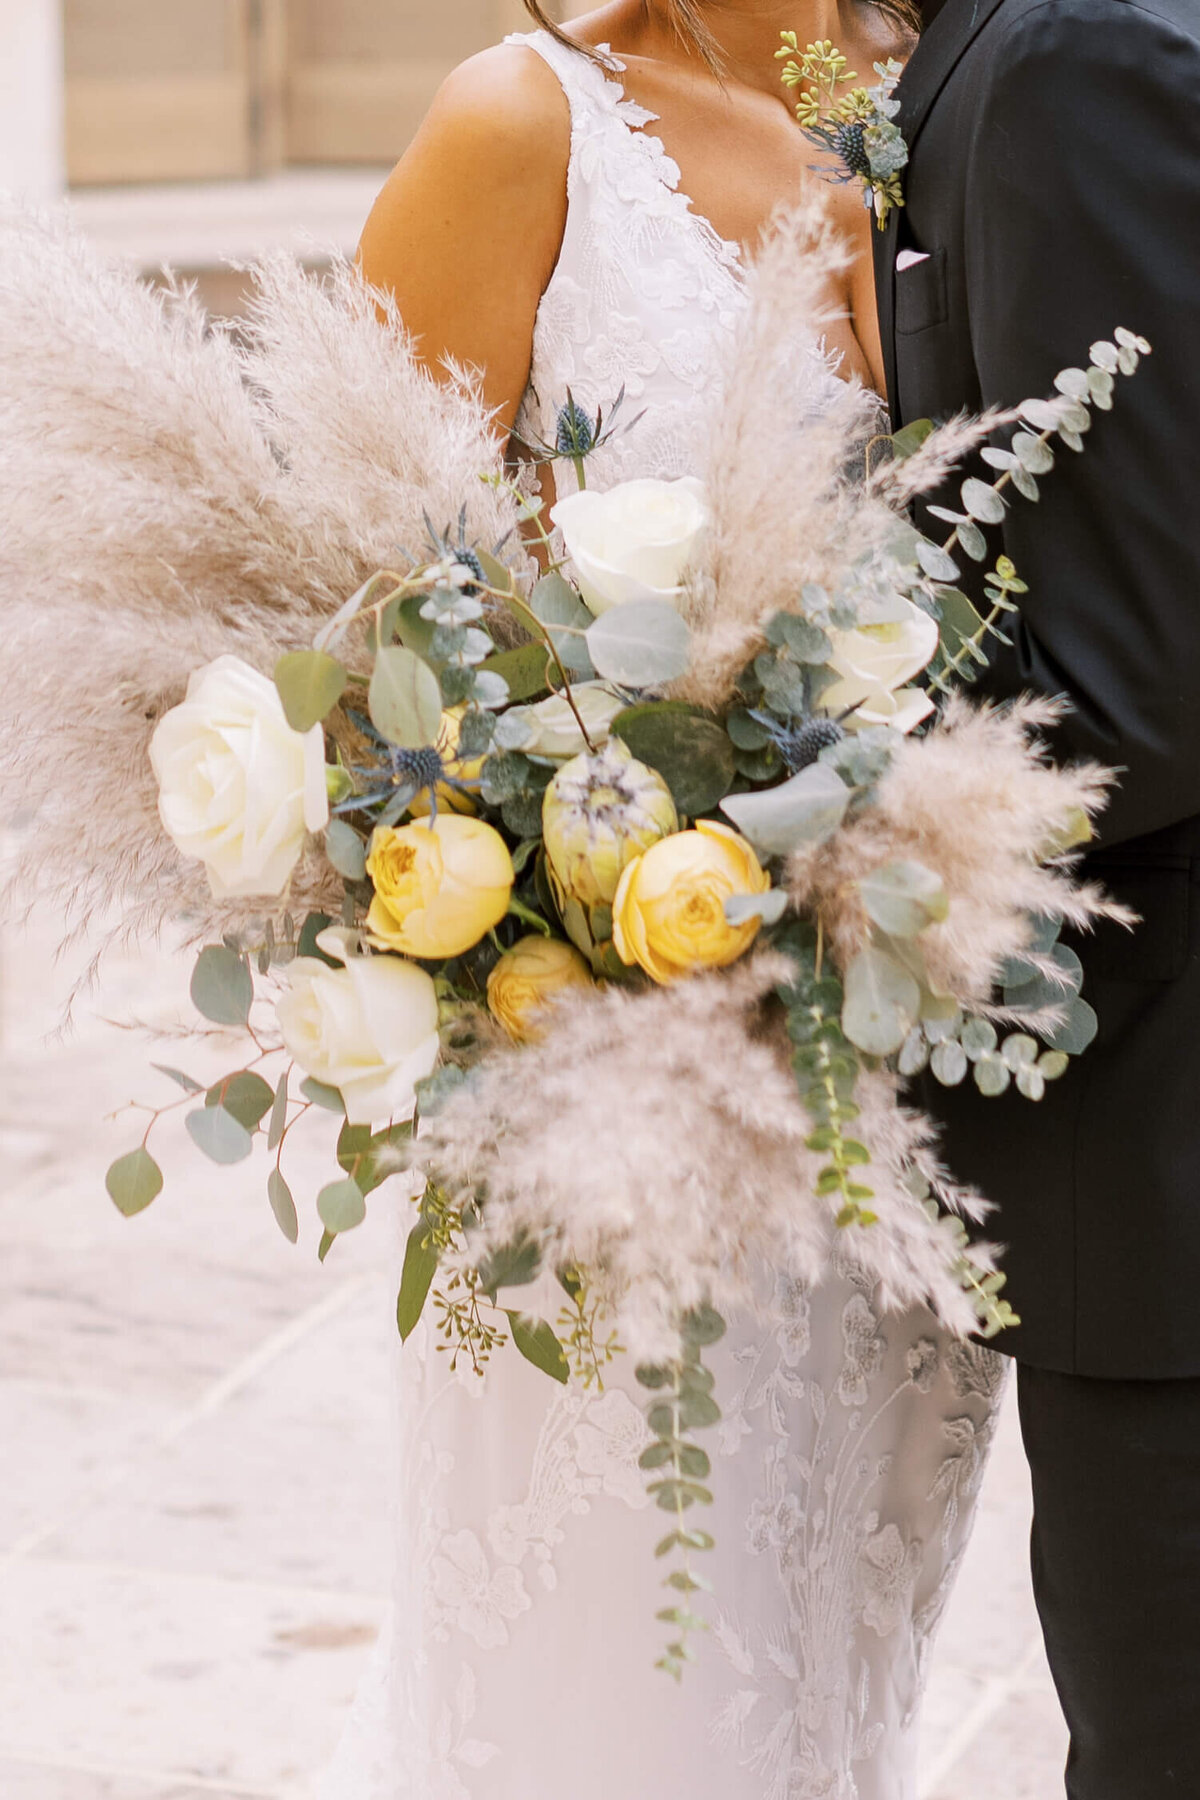 gorgeous and huge wedding bouquet with ranunculus, roses, pampas grass, and eucalyptus for this timeless wedding in southern california